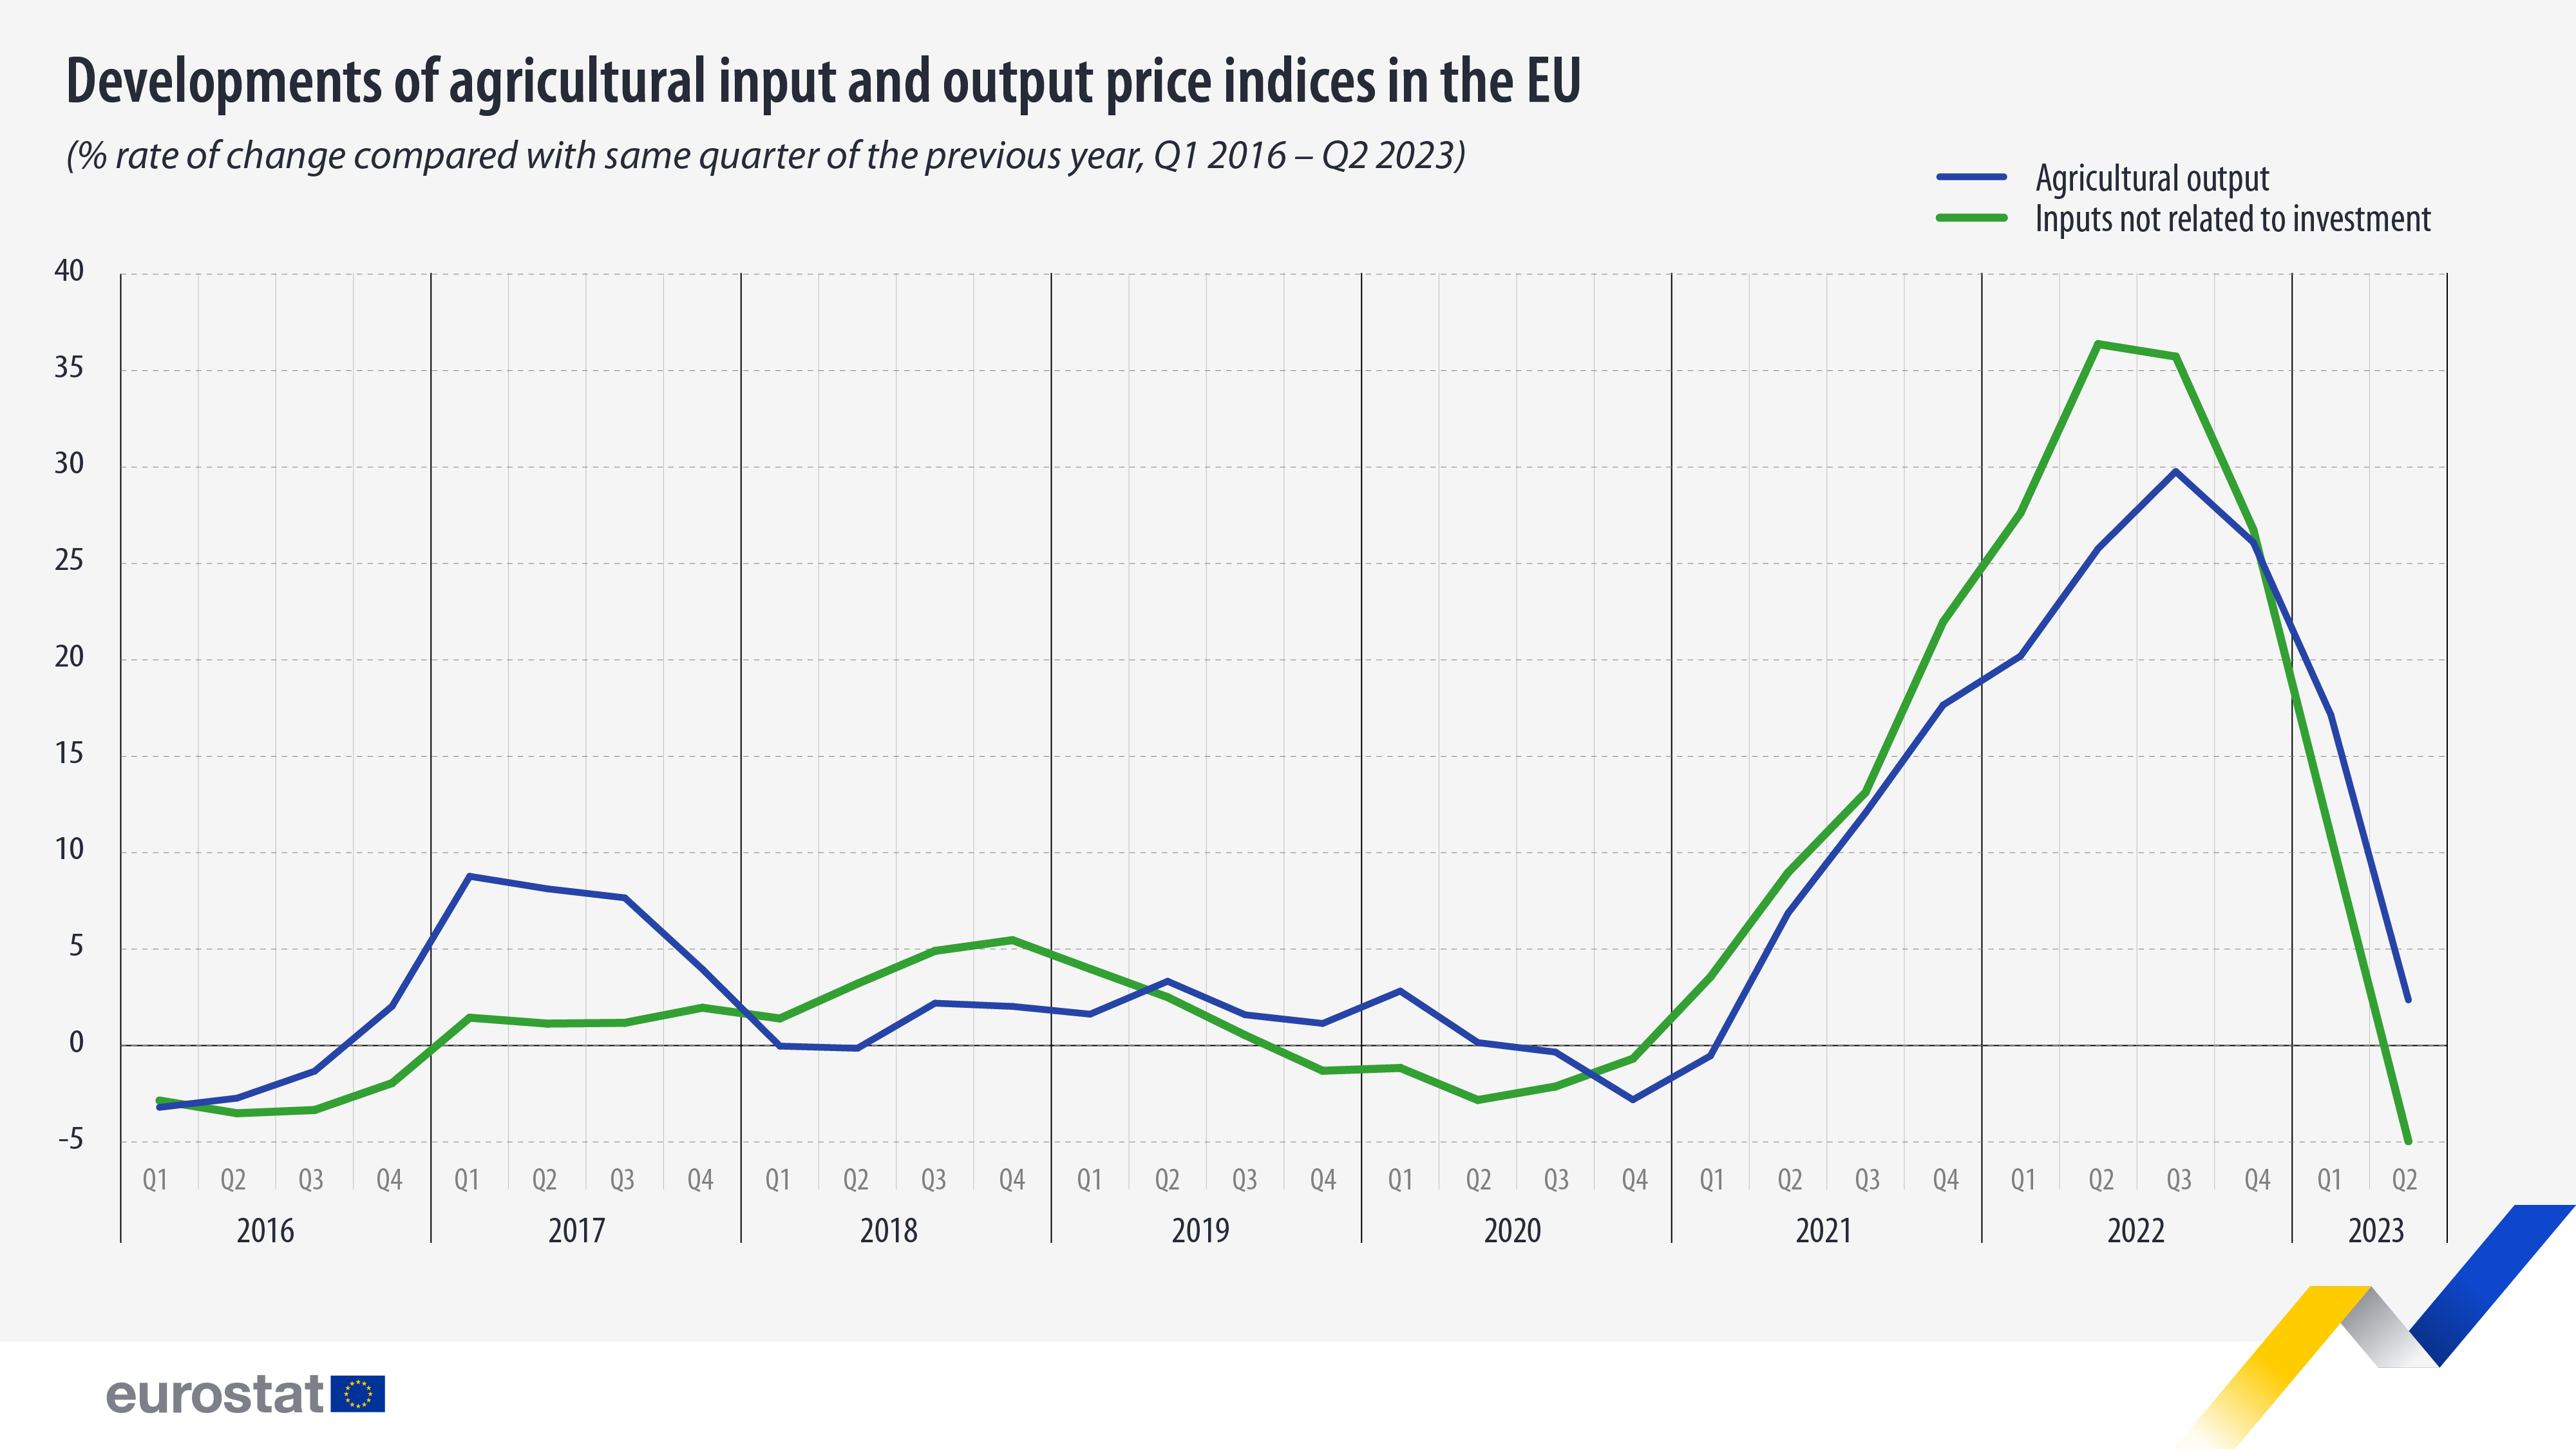 Line chart: Agricultural input and output price indices in the EU, Q1 2016 - Q2 2023, % rate of change 